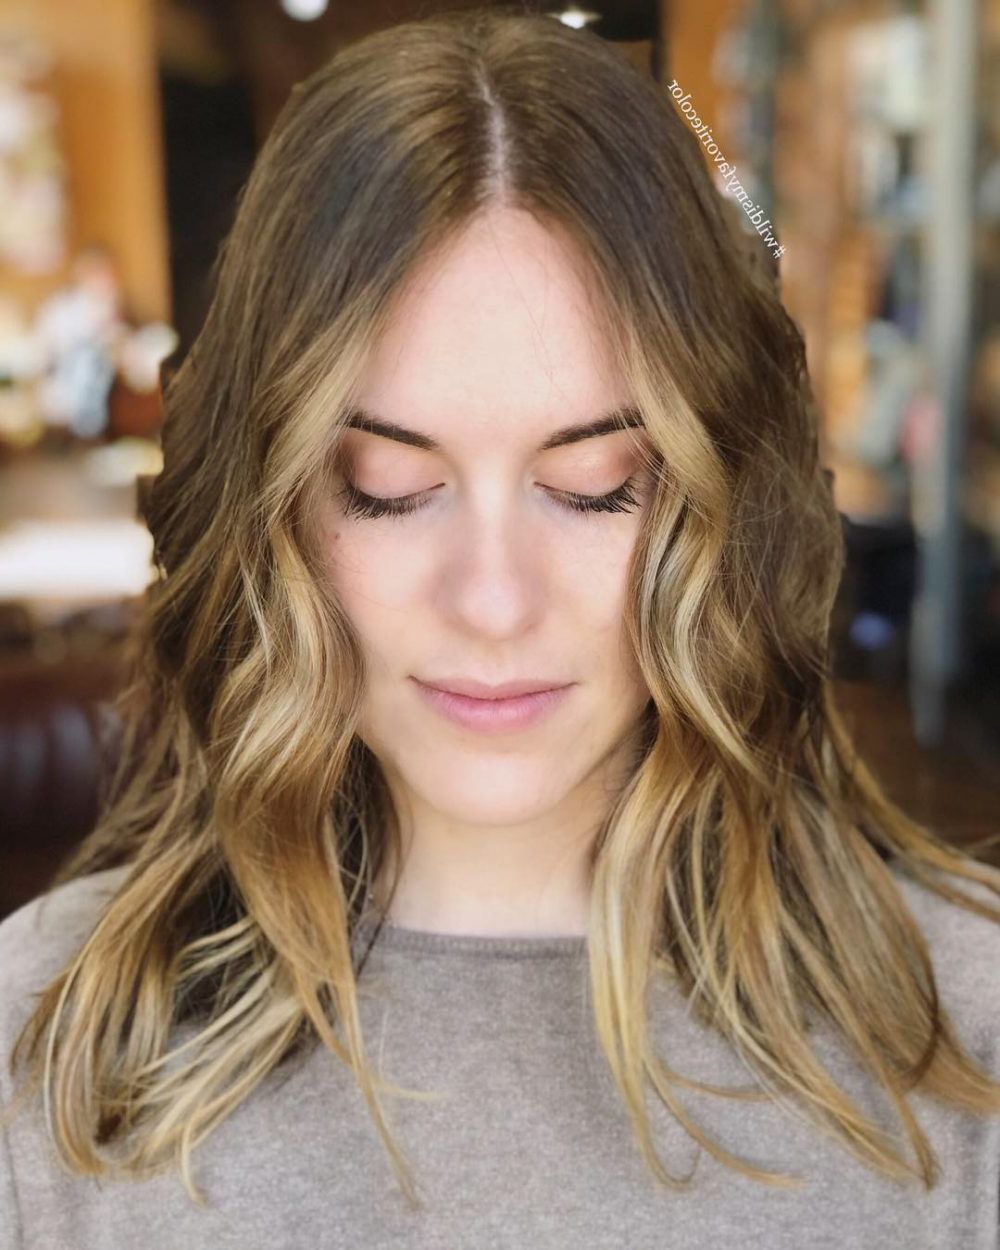 17 Flattering Medium Hairstyles For Round Faces In 2019 With Most Up To Date Super Medium Hairstyles For Round Faces (View 2 of 20)